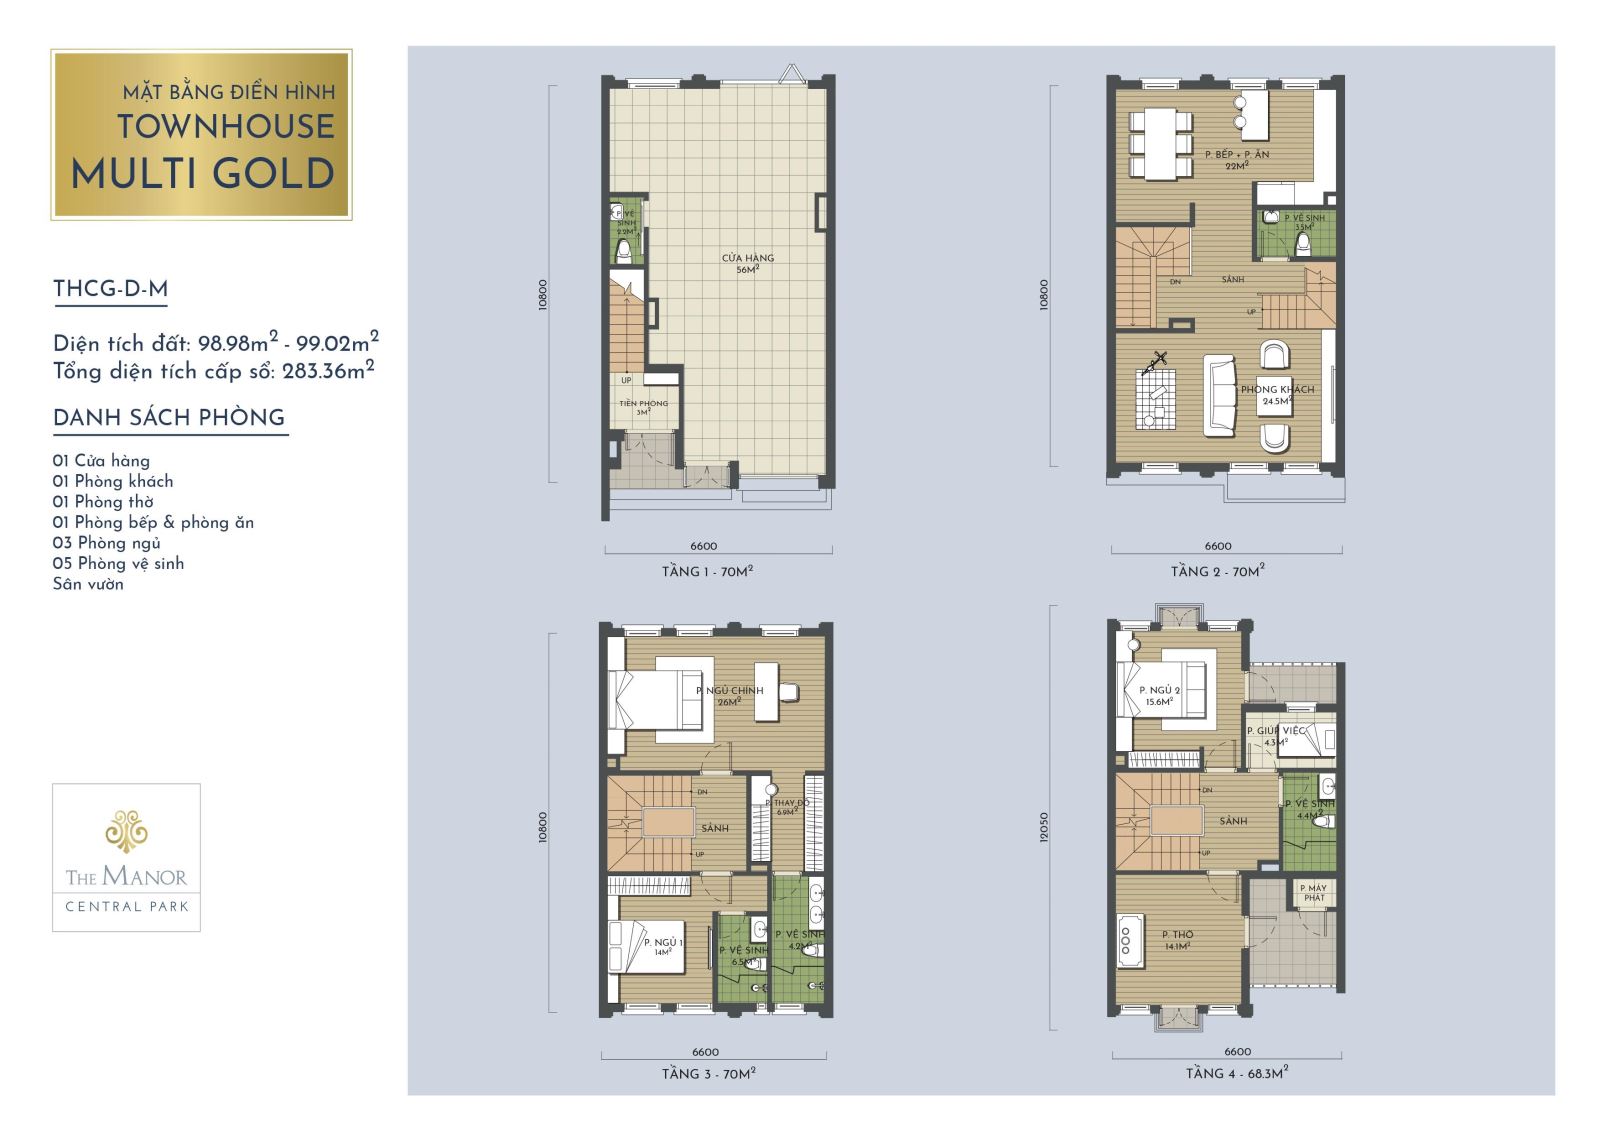 Layout floor of Townhouse Multi Gold